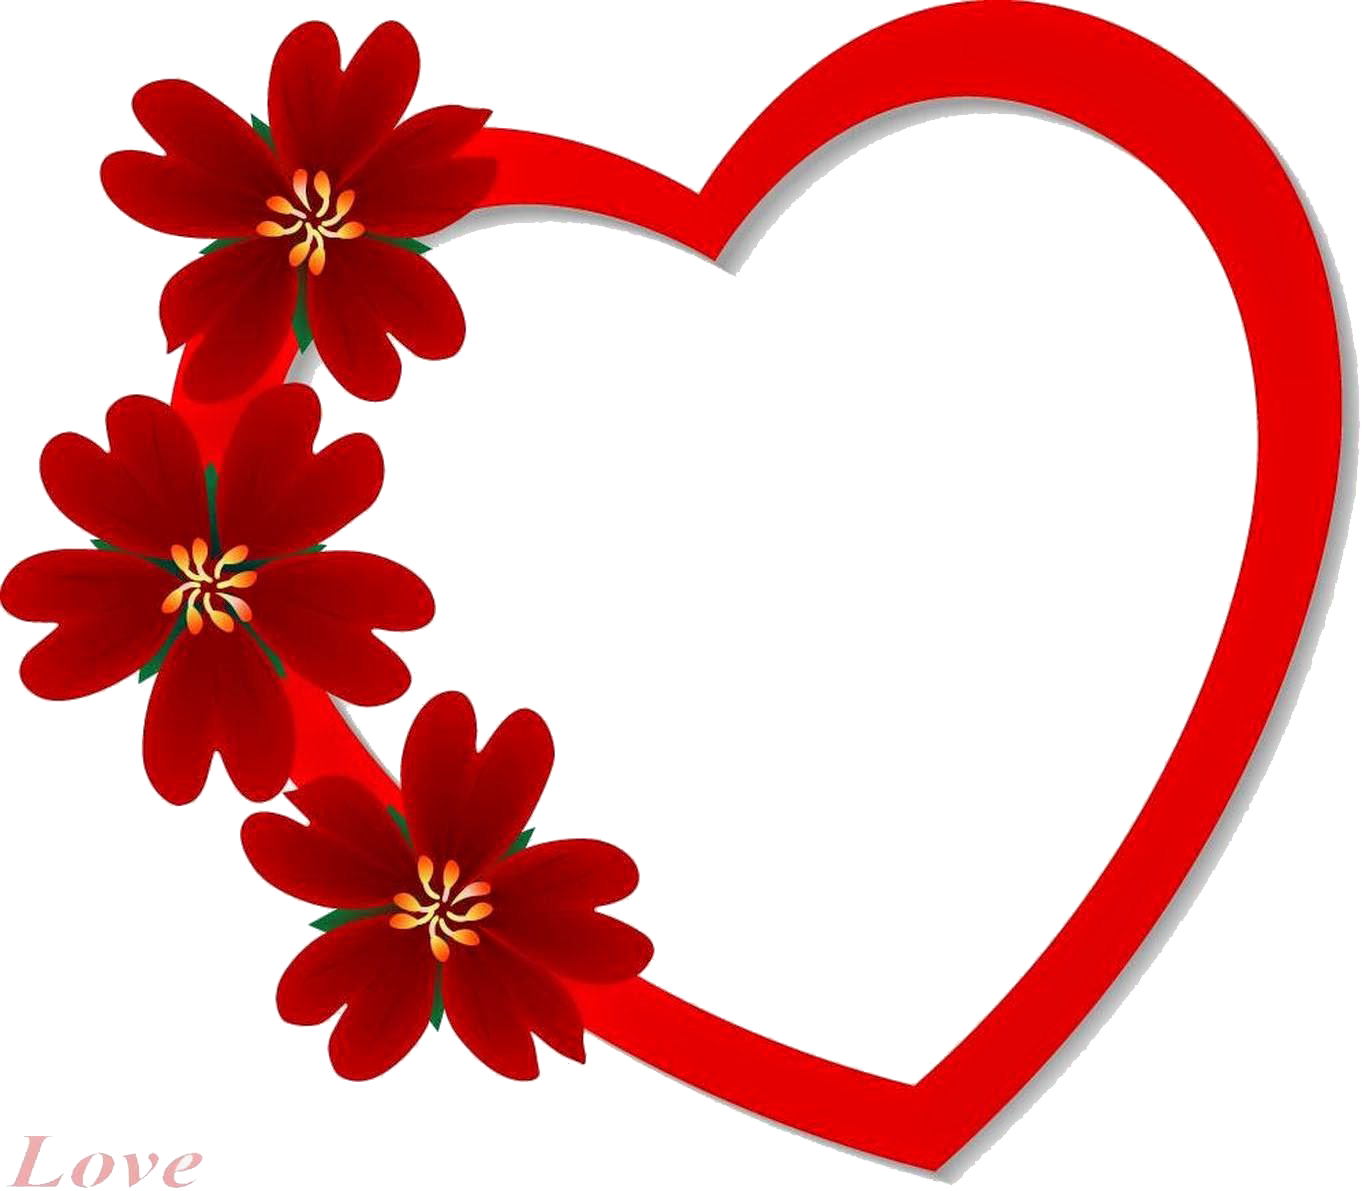 Heart Frame Free Photo PNG Image